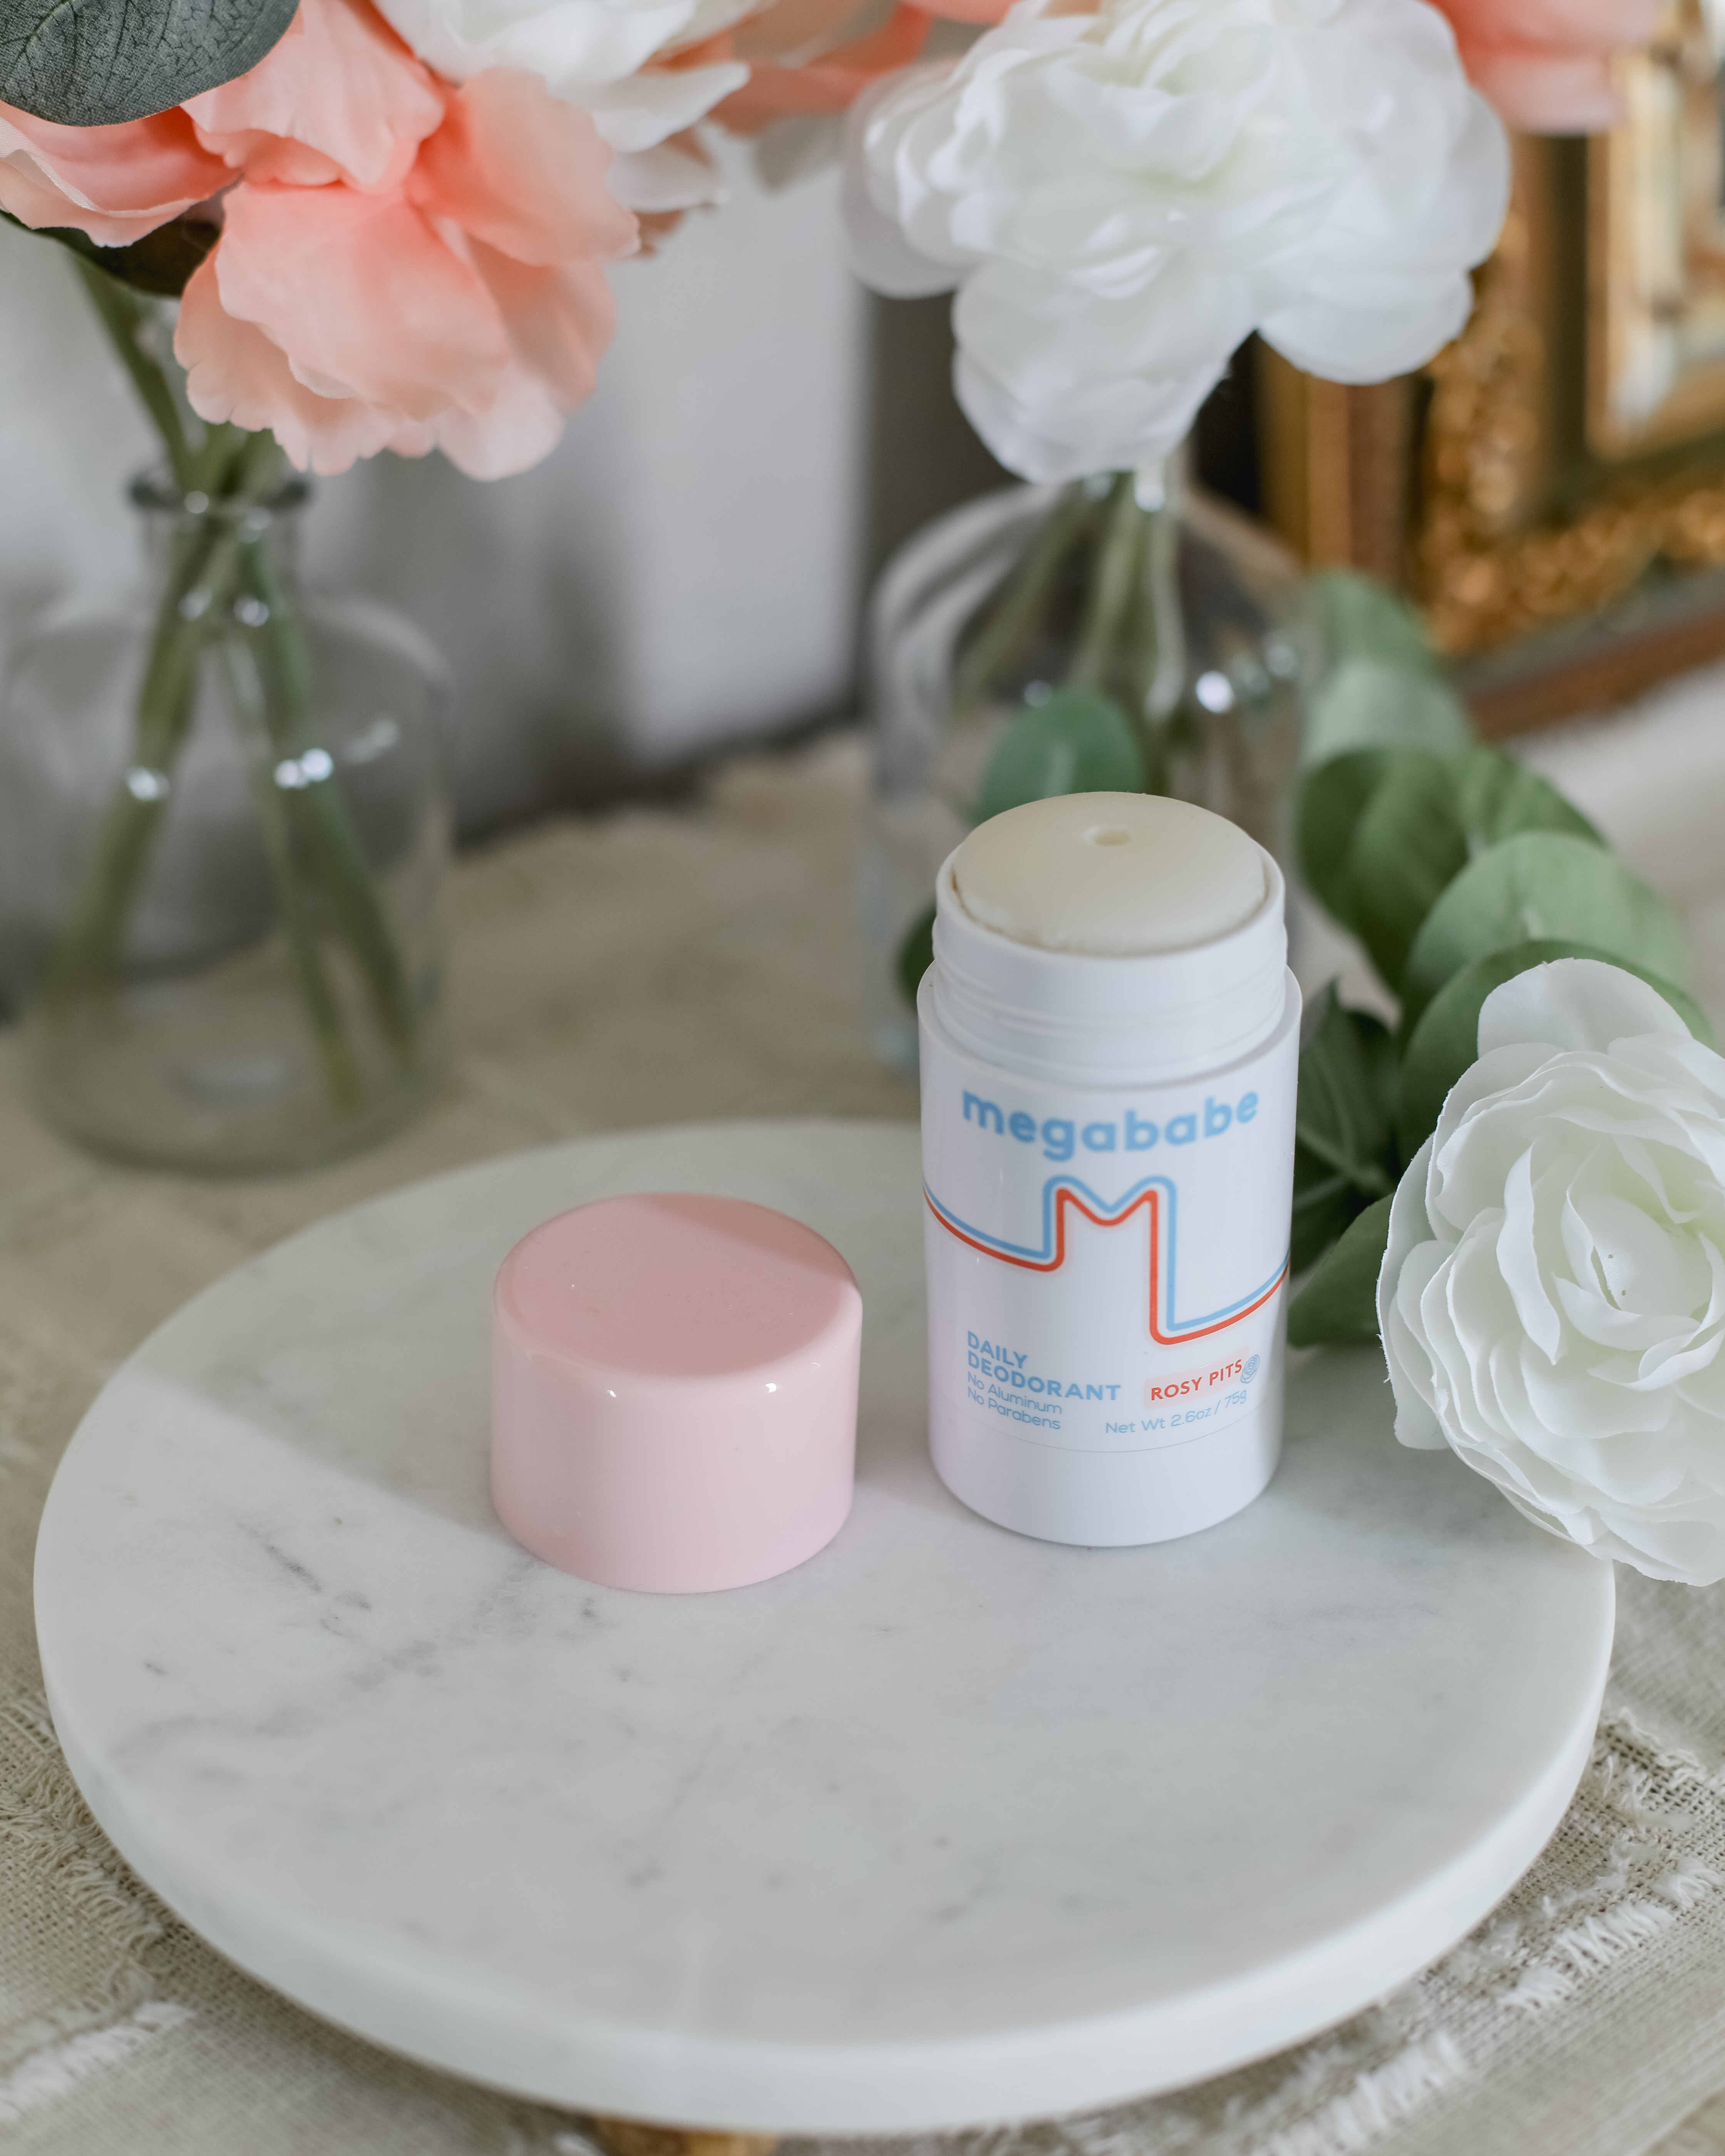 Megababe Rosy Pits Daily Deodorant Review - Affordable by Amanda - Best Natural Deodorant 2021